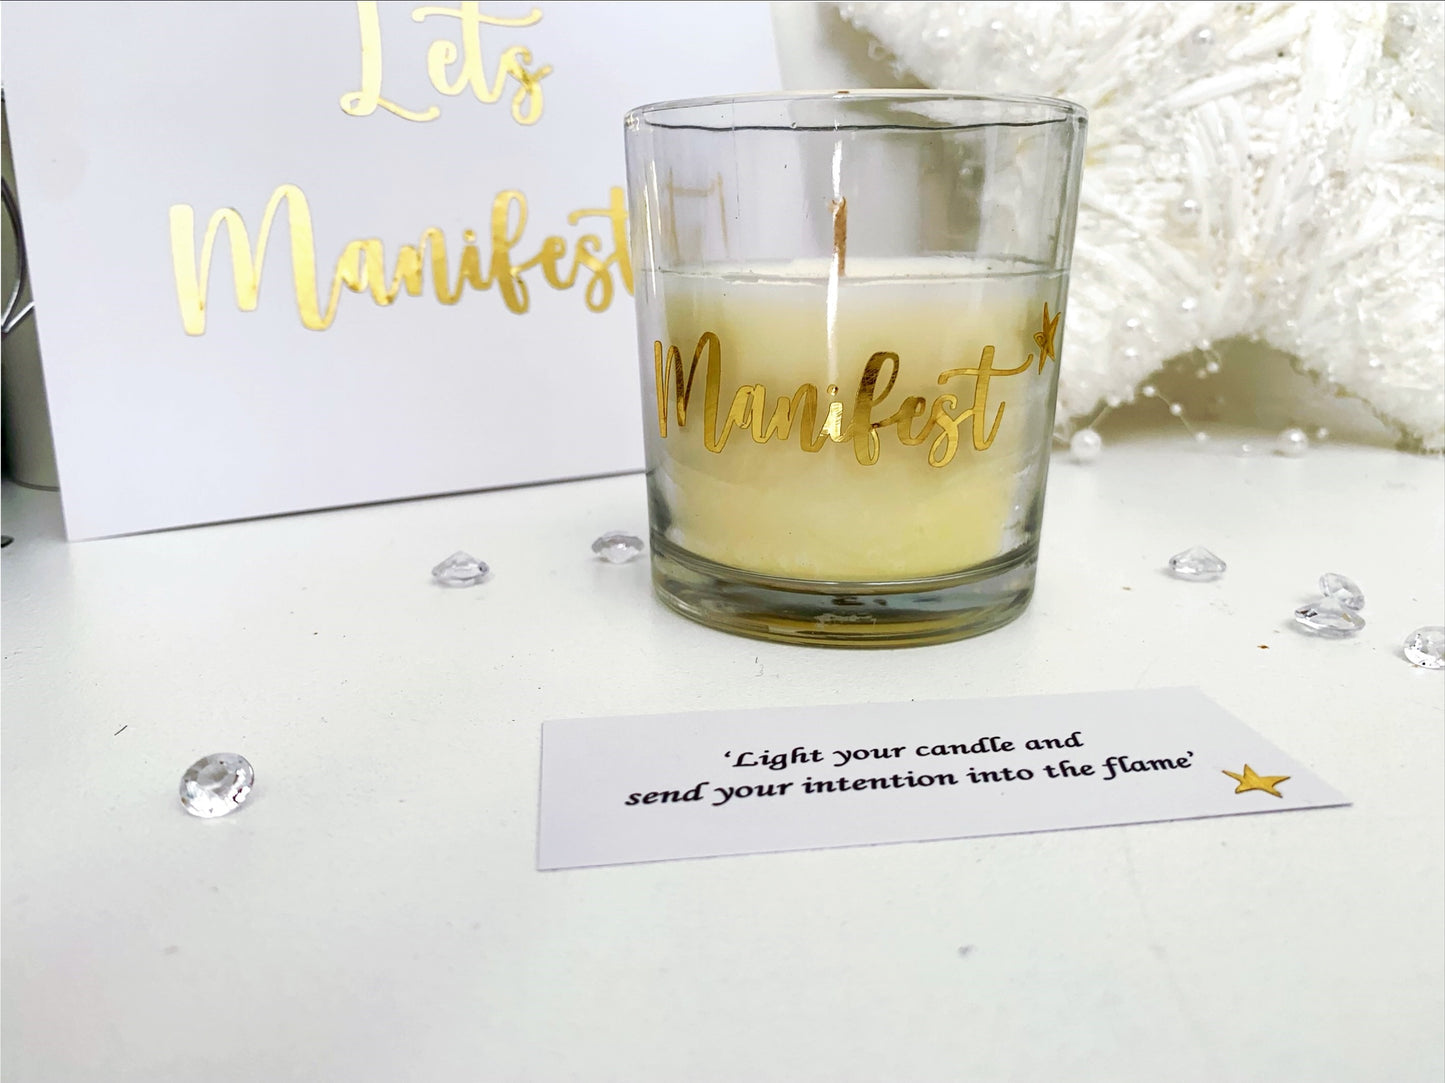 Law Of Attraction Manifest Candle